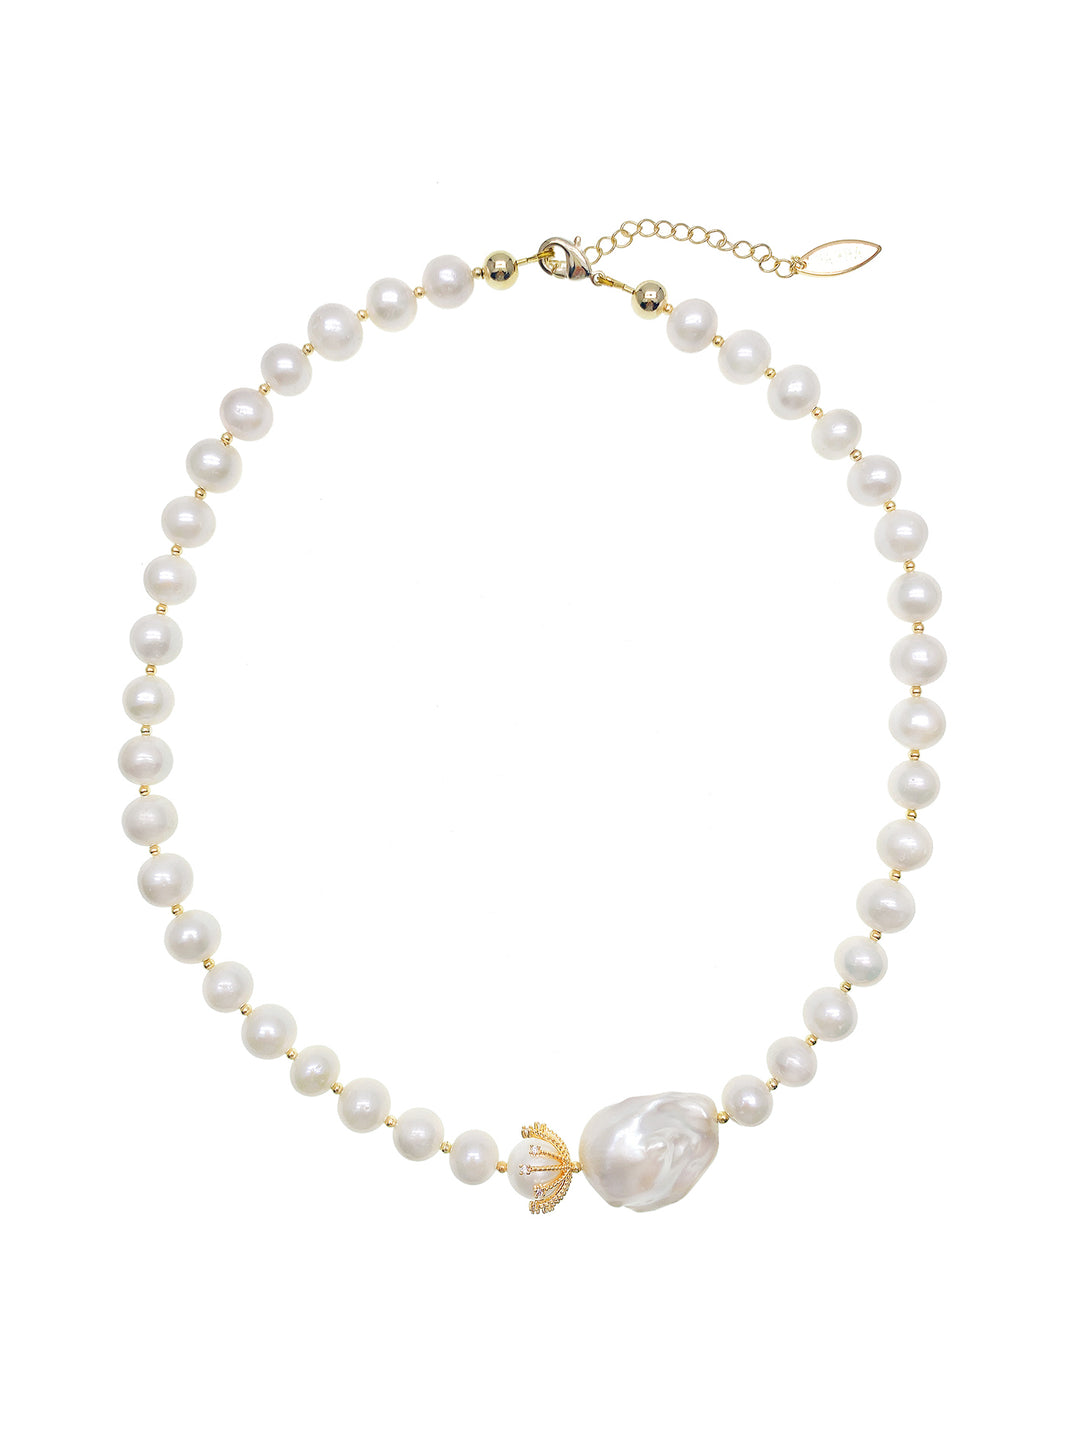 Freshwater Pearls with Baroque Pearl Necklace HN039 - FARRA